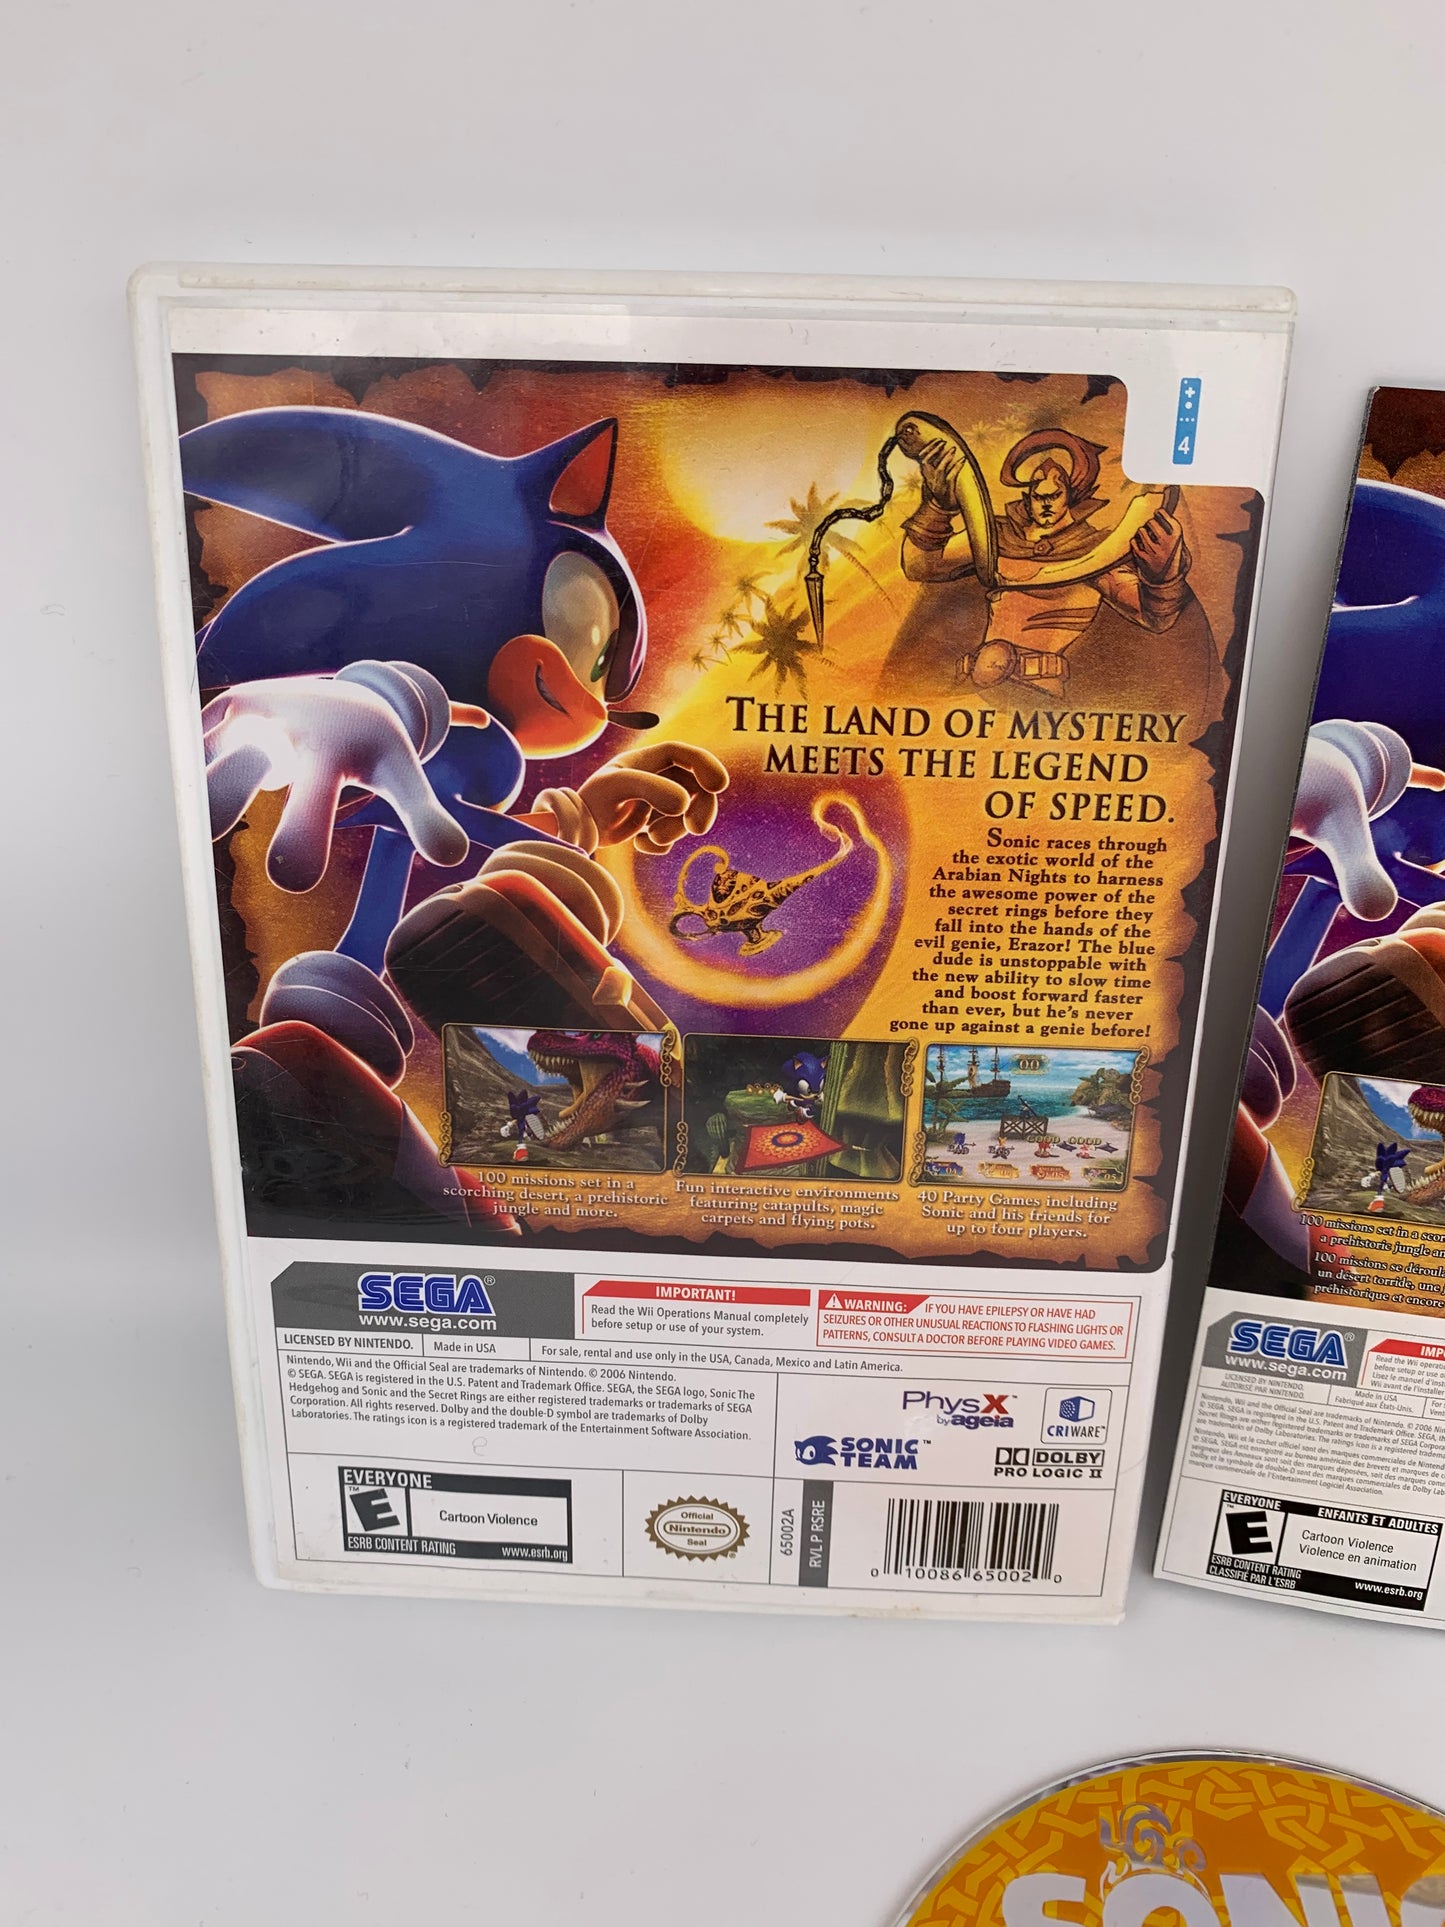 NiNTENDO Wii | SONiC AND THE SECRET RiNGS